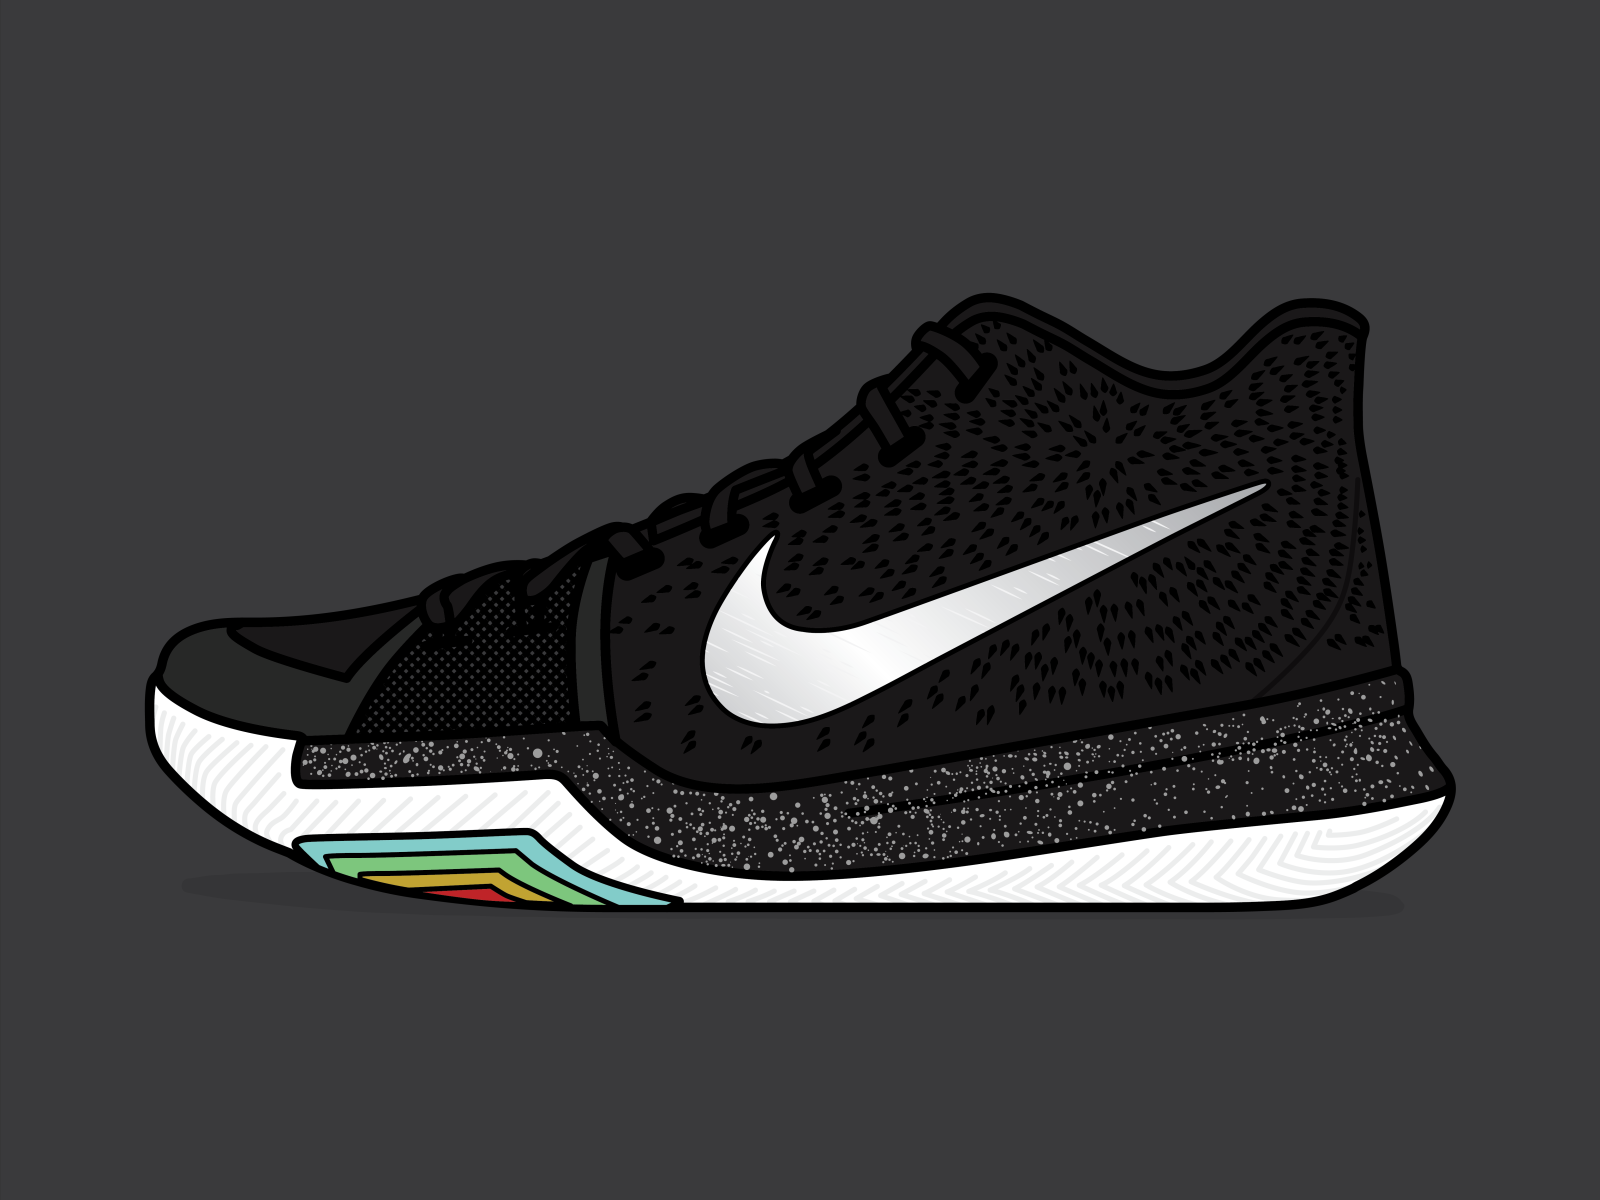 kyrie 3 shoes drawing